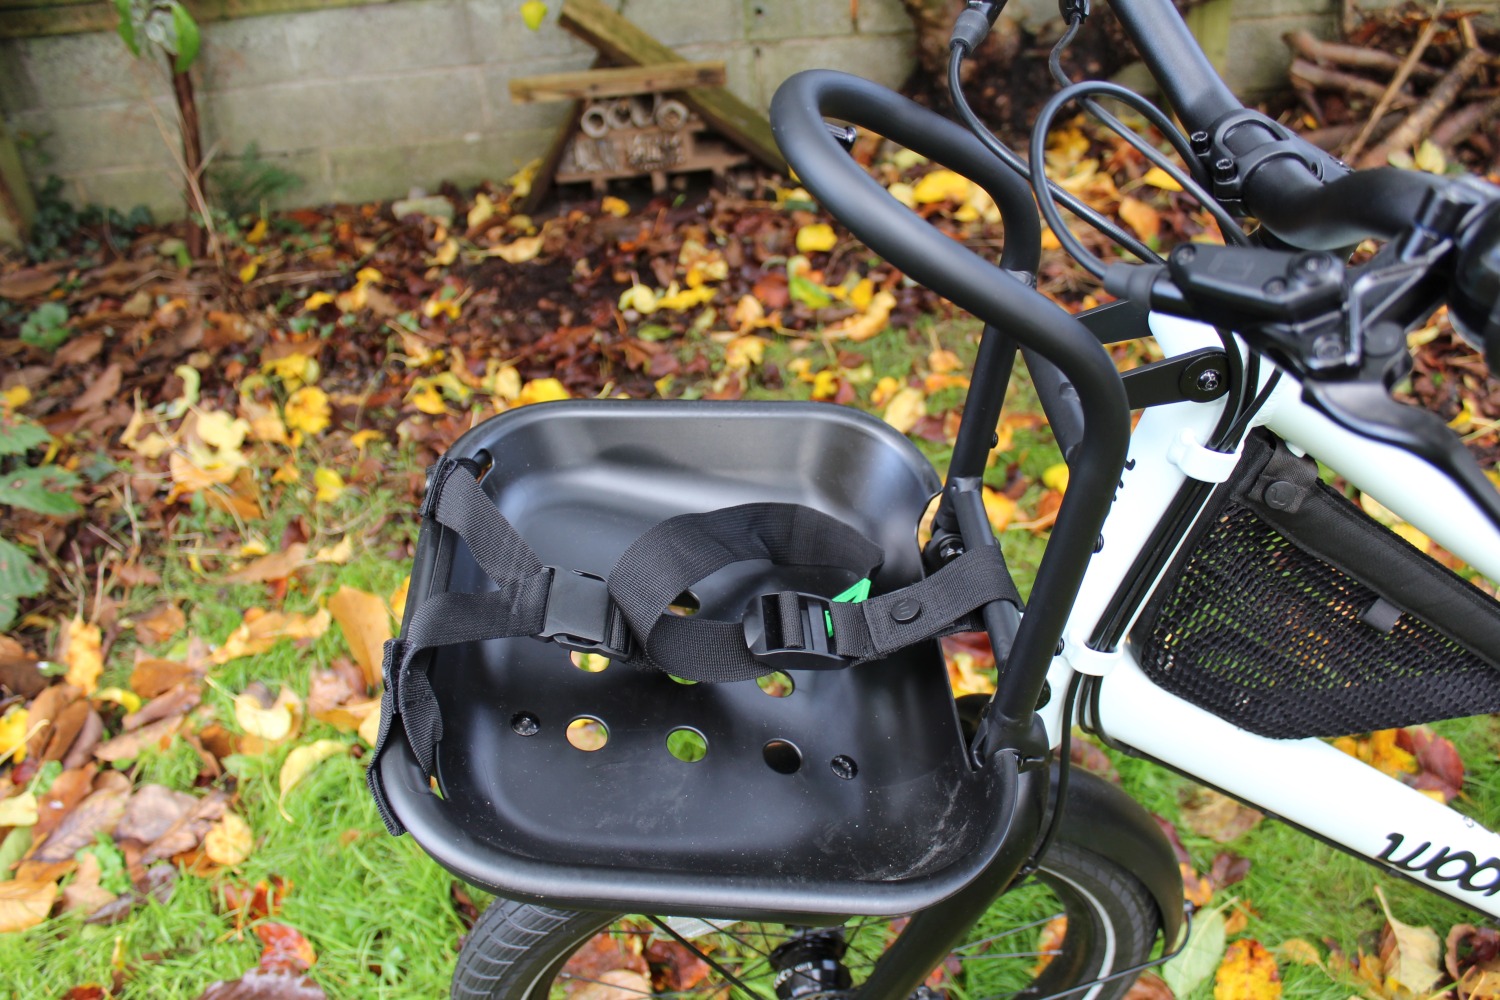 Full review of the Woom NOW 5 children's bike